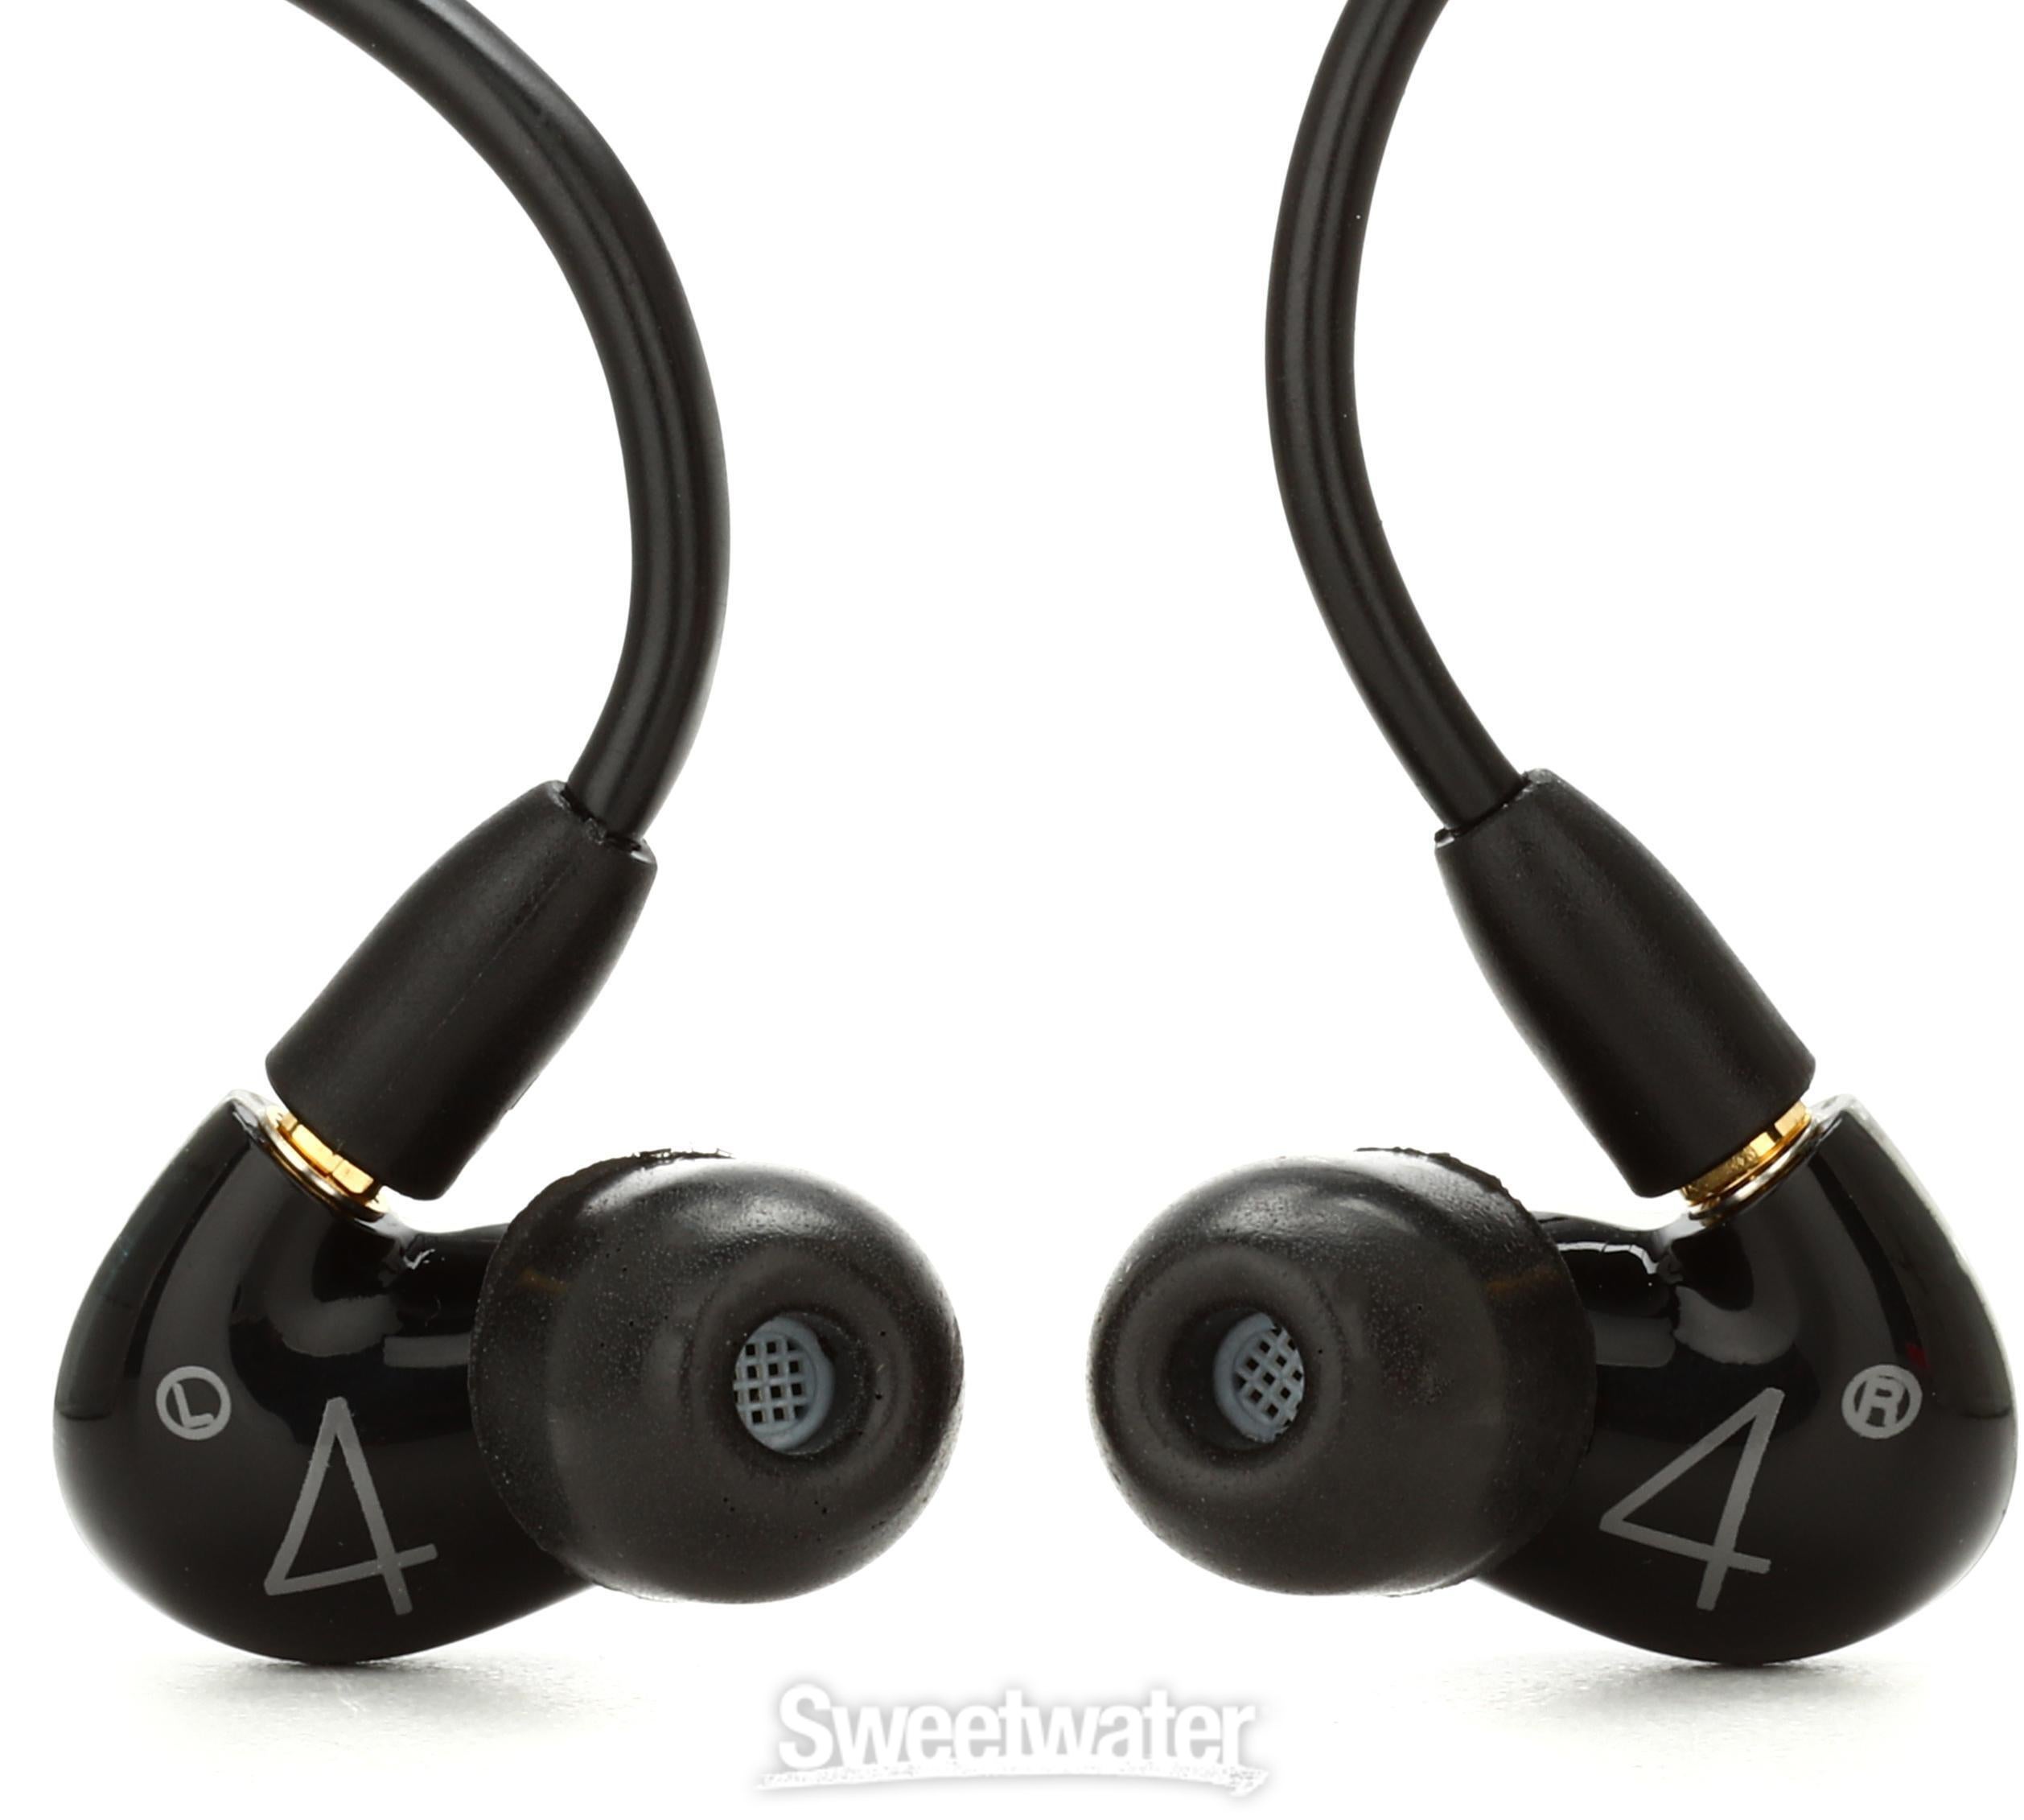 Shure AONIC 4 Sound Isolating Earphones - Black Reviews | Sweetwater